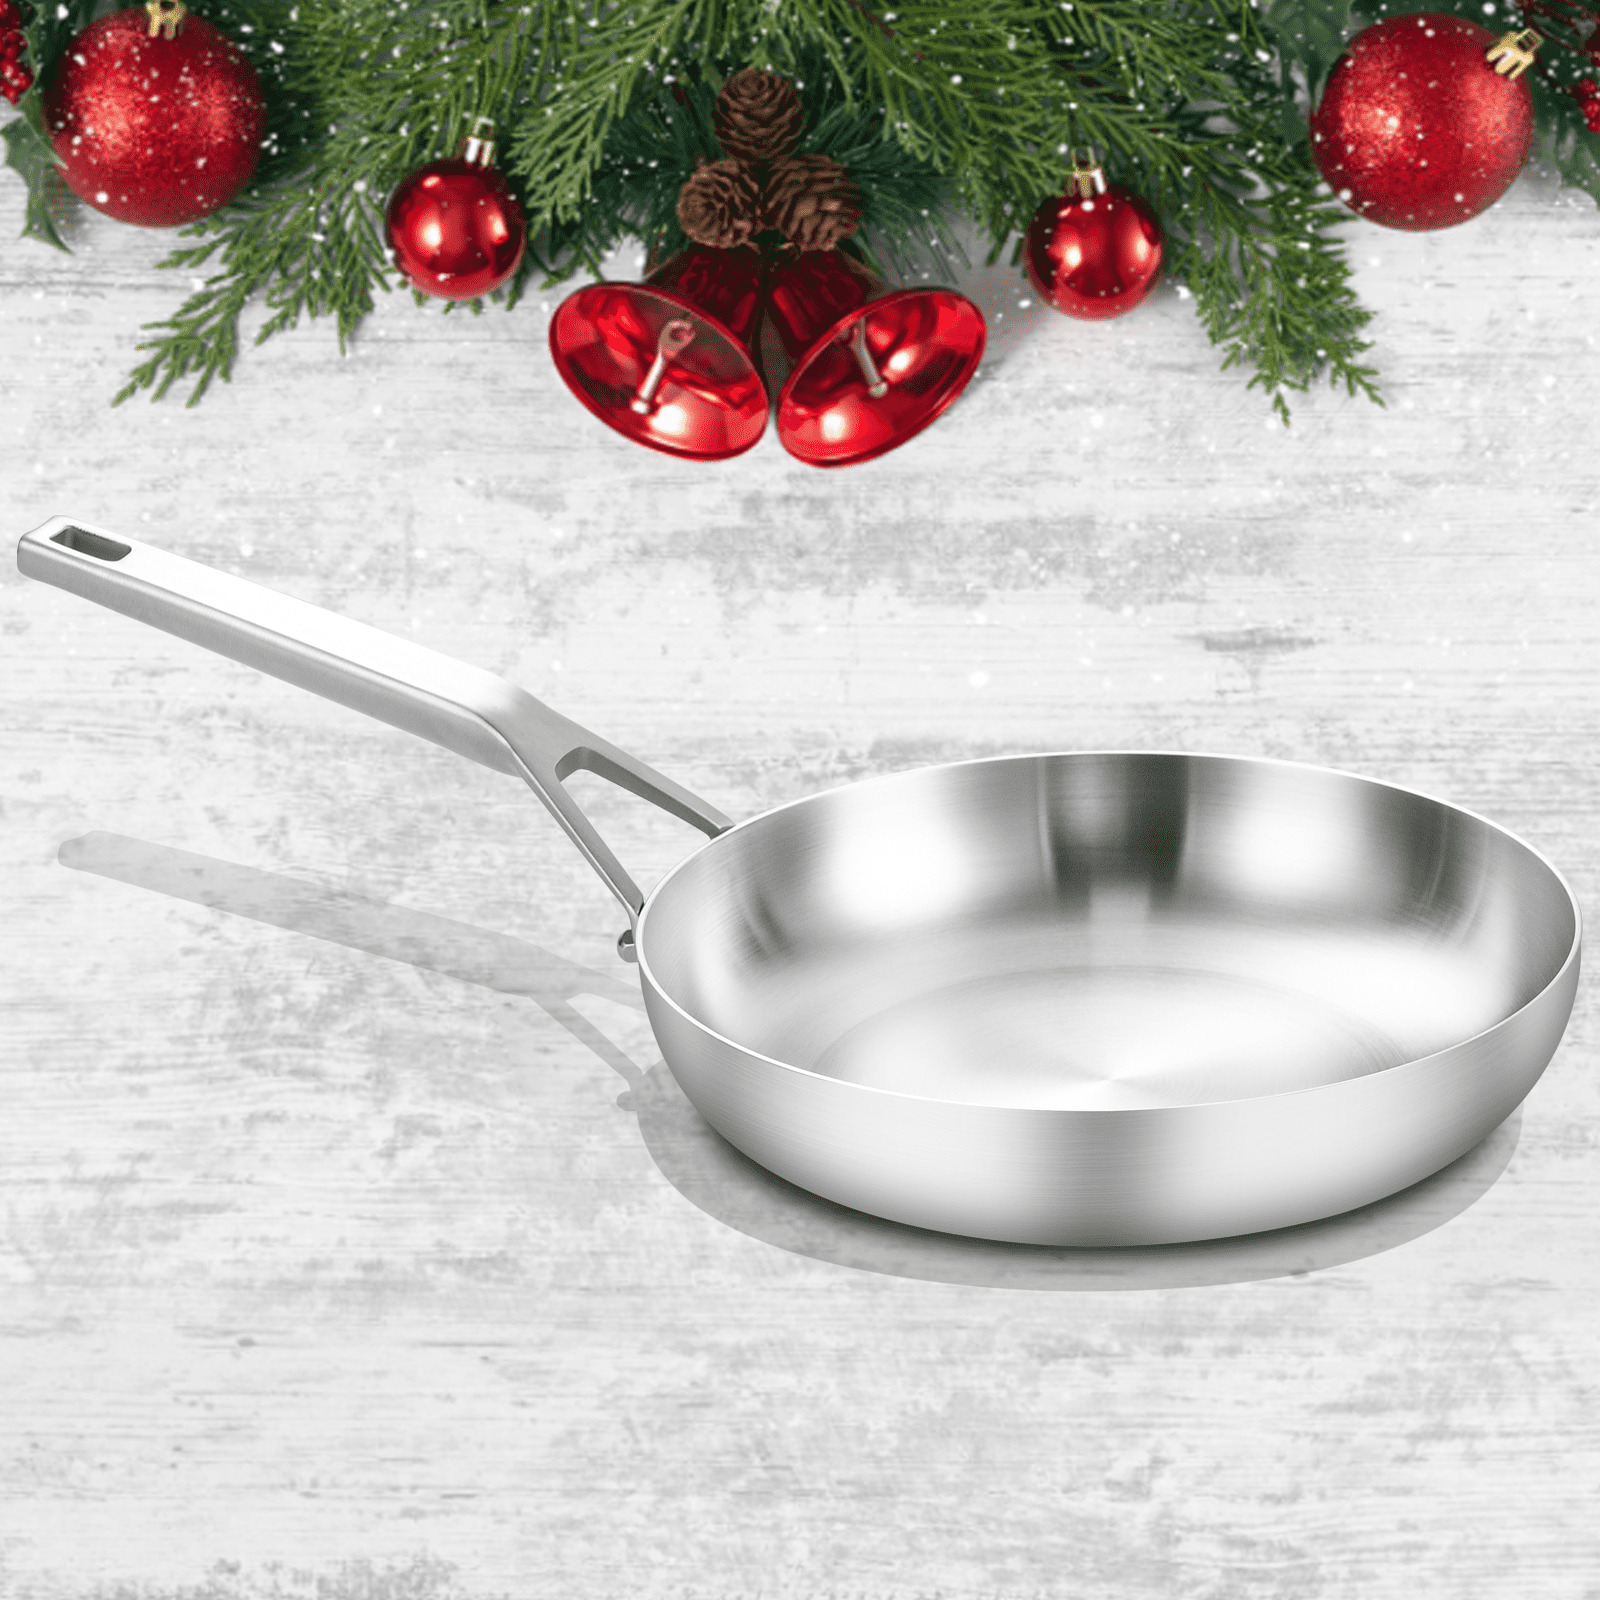 Phantom Chef 8” & 11 Frying Pan Set | Pure Aluminum Nonstick Frying Pan  Set With Easy Clean Ceramic Coating | Soft Touch Stay Cool Handle | PTFE  PFOA